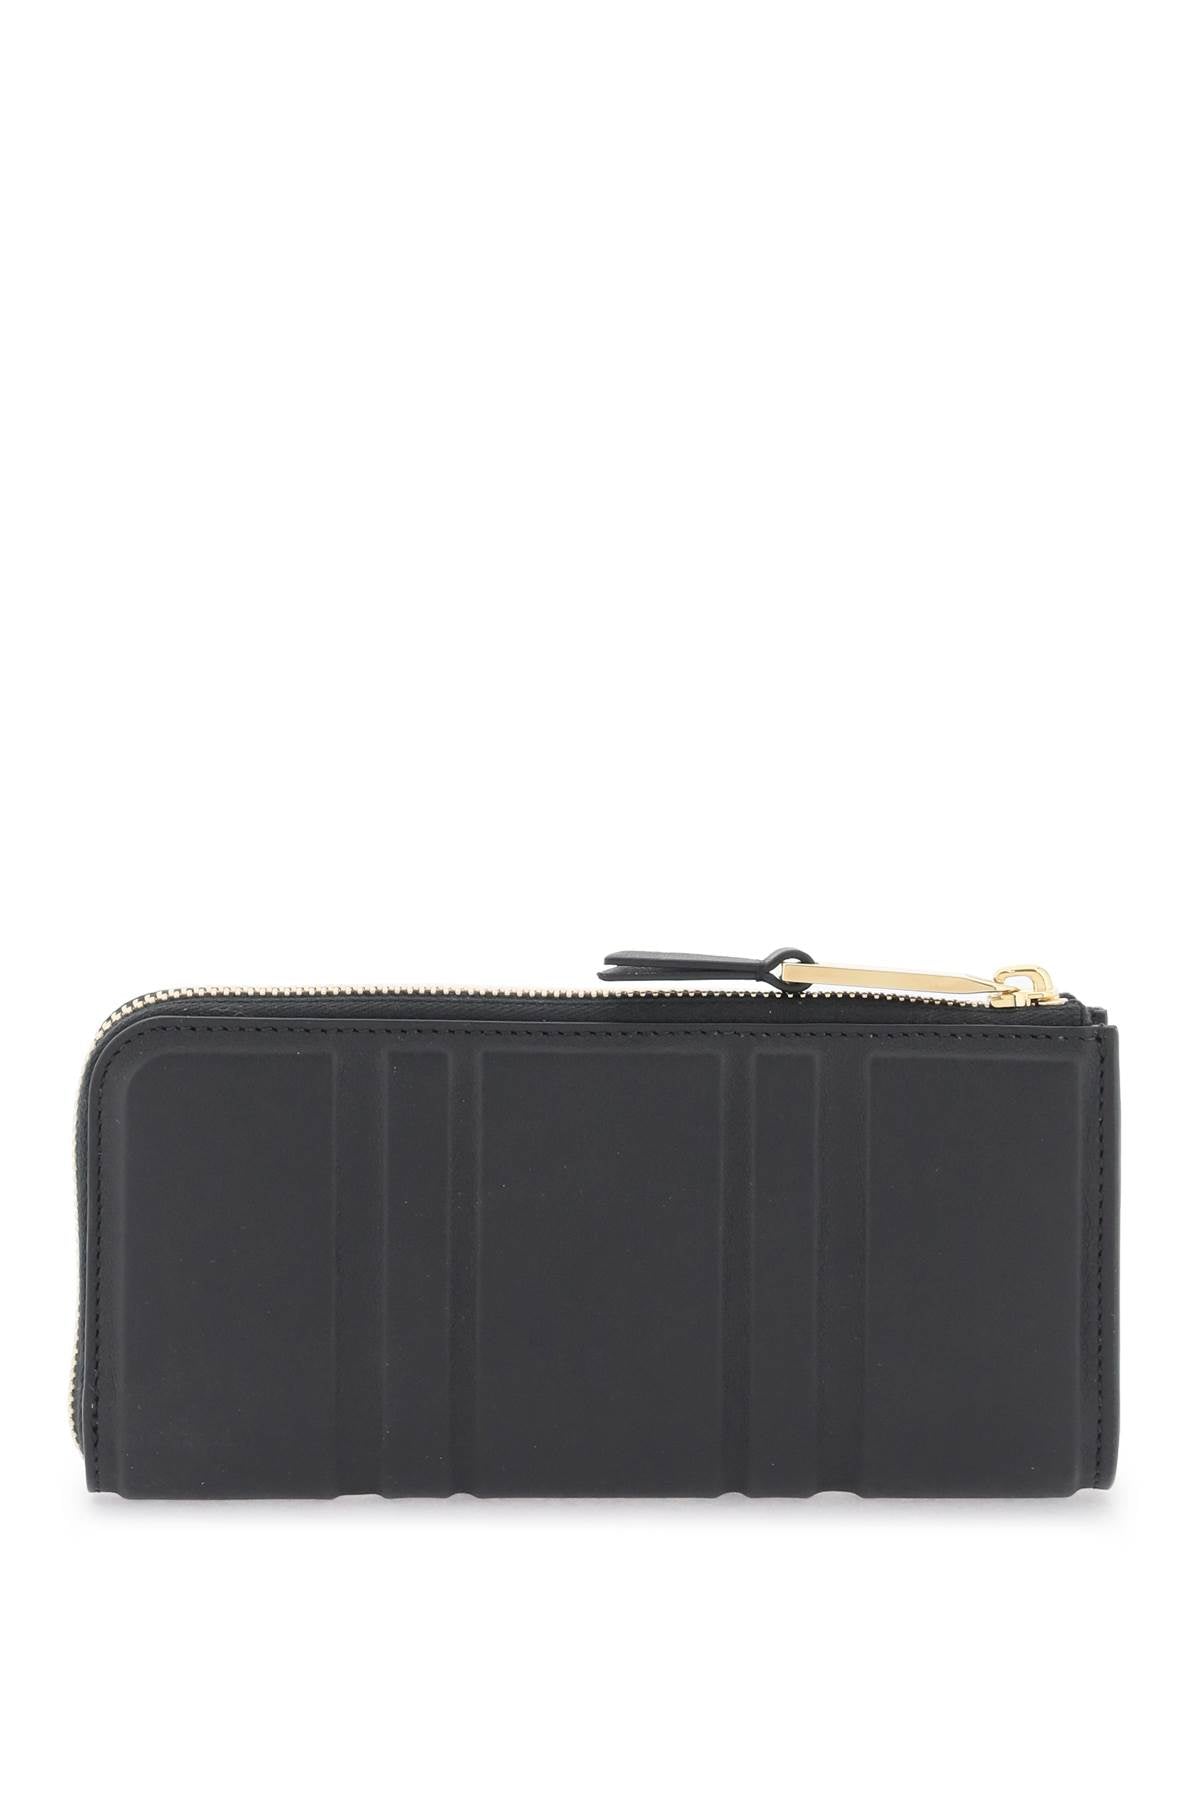 CHLOÉ Luxurious Black Continental Wallet for Women